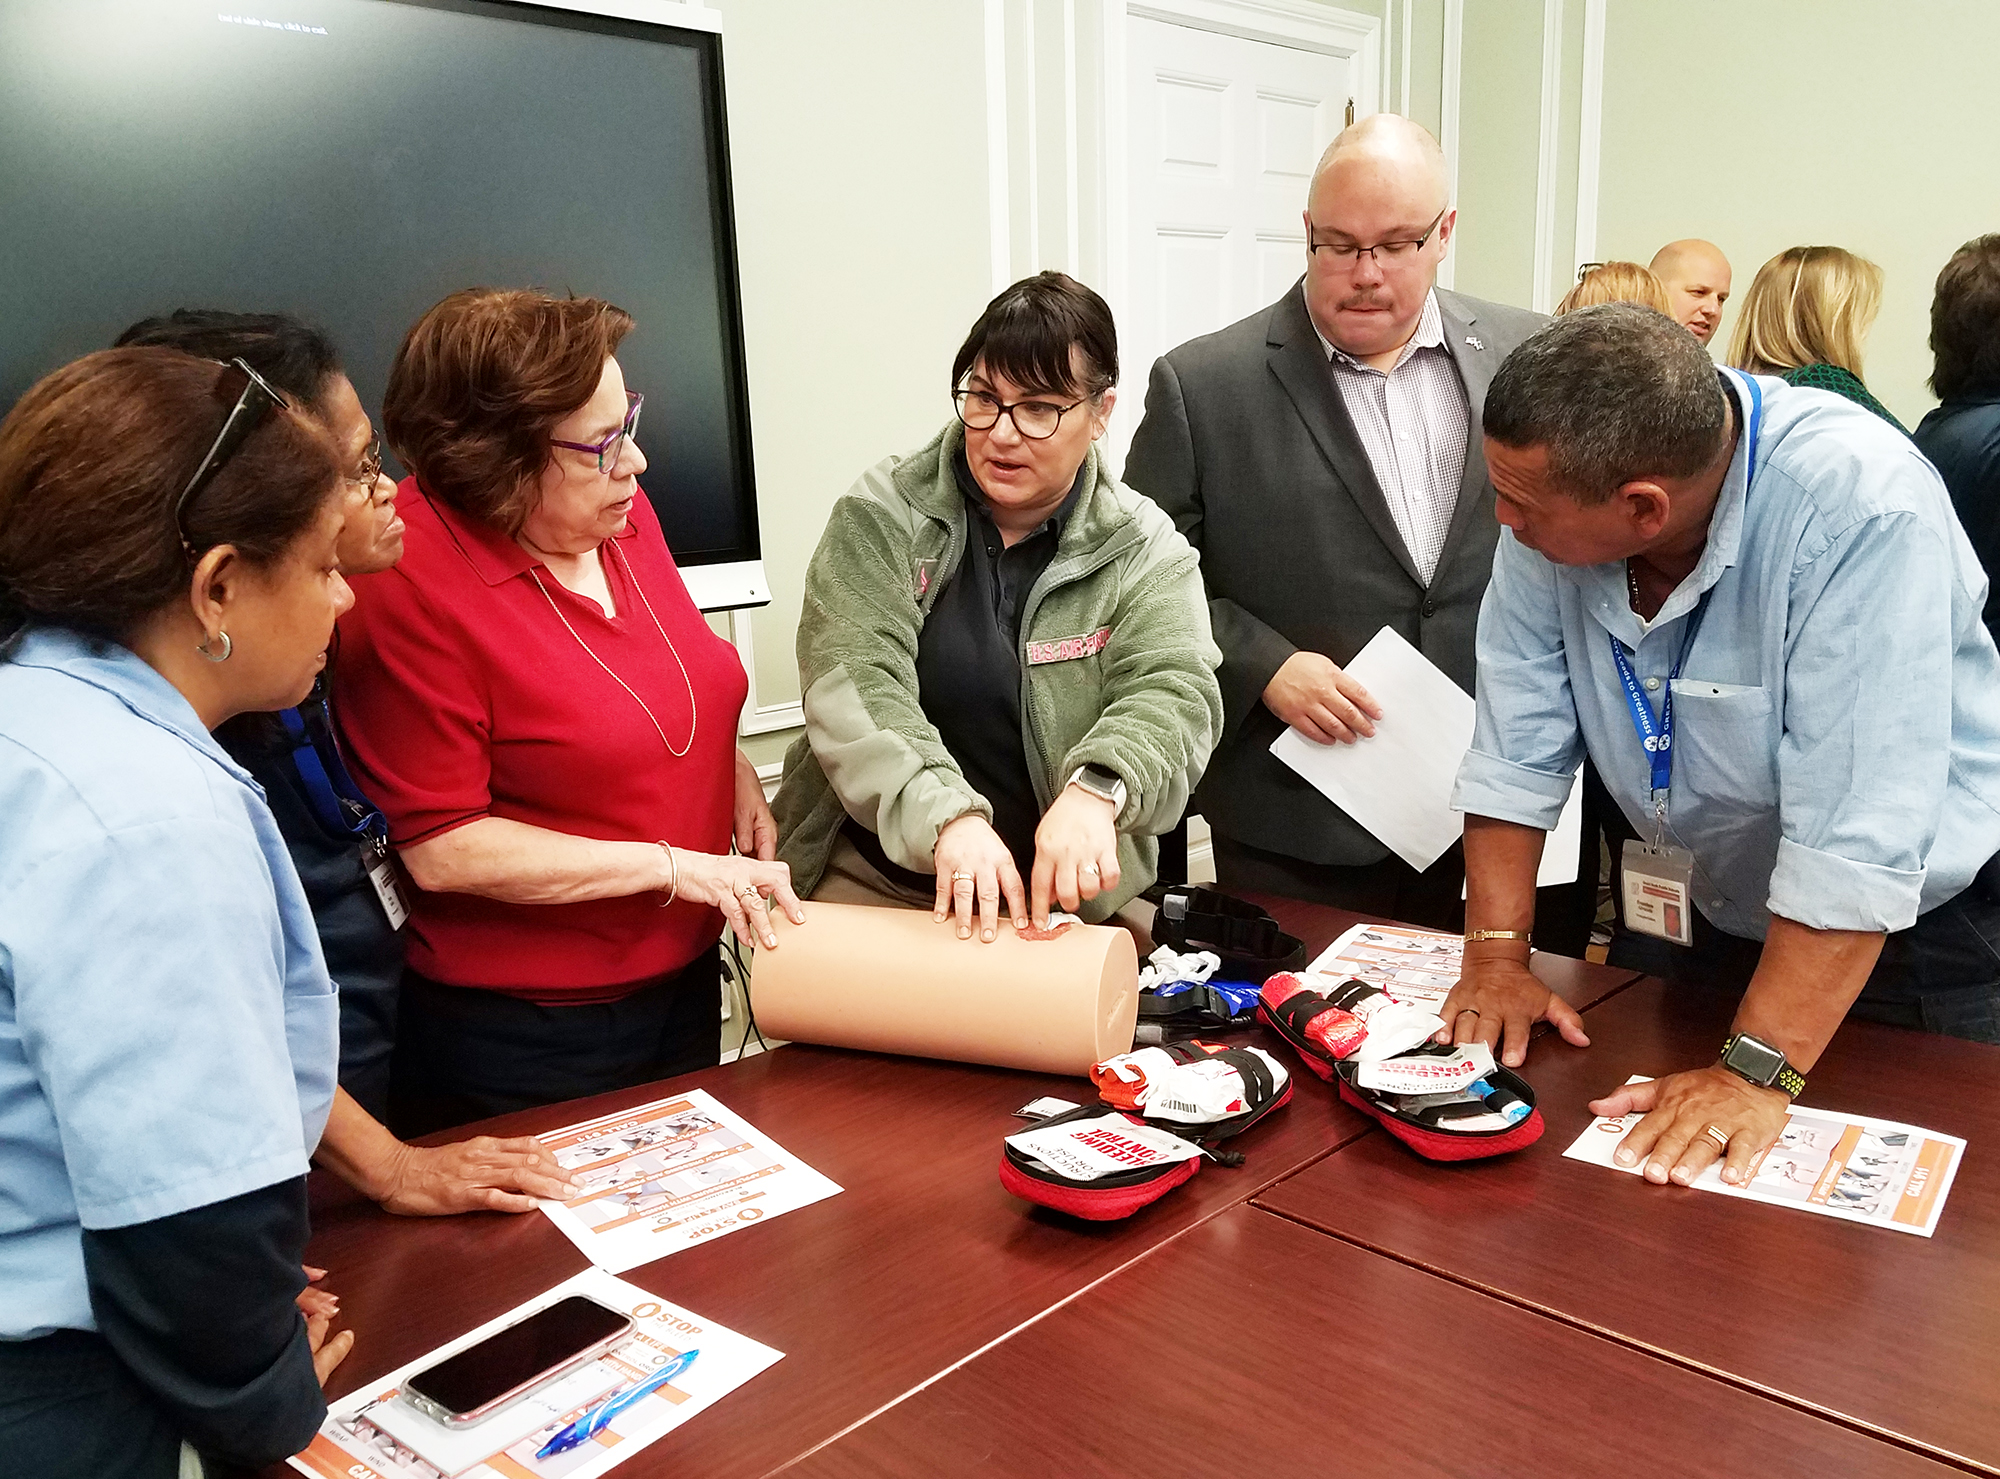 A representative from the Nassau County Fire-Police EMS Academy demonstrates life-saving bleeding control strategies during a recent training workshop as part of the Stop the Bleed initiative. (Photo courtesy of Great Neck Public Schools)